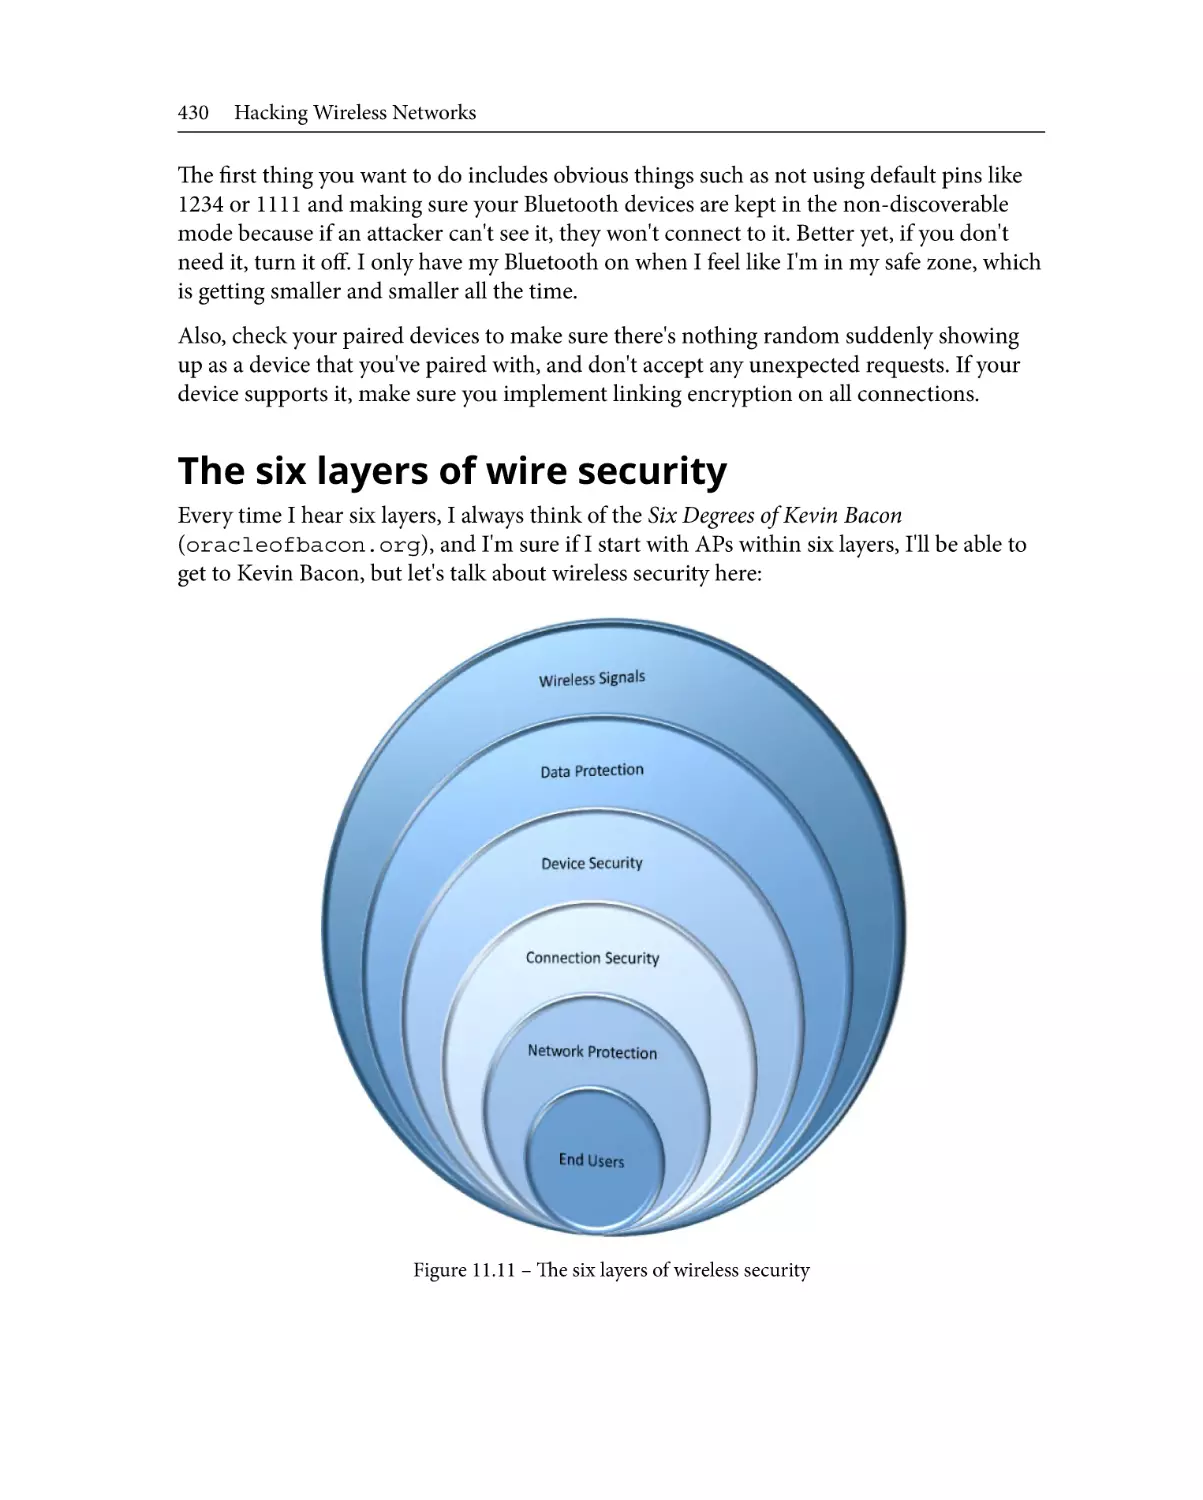 The six layers of wire security